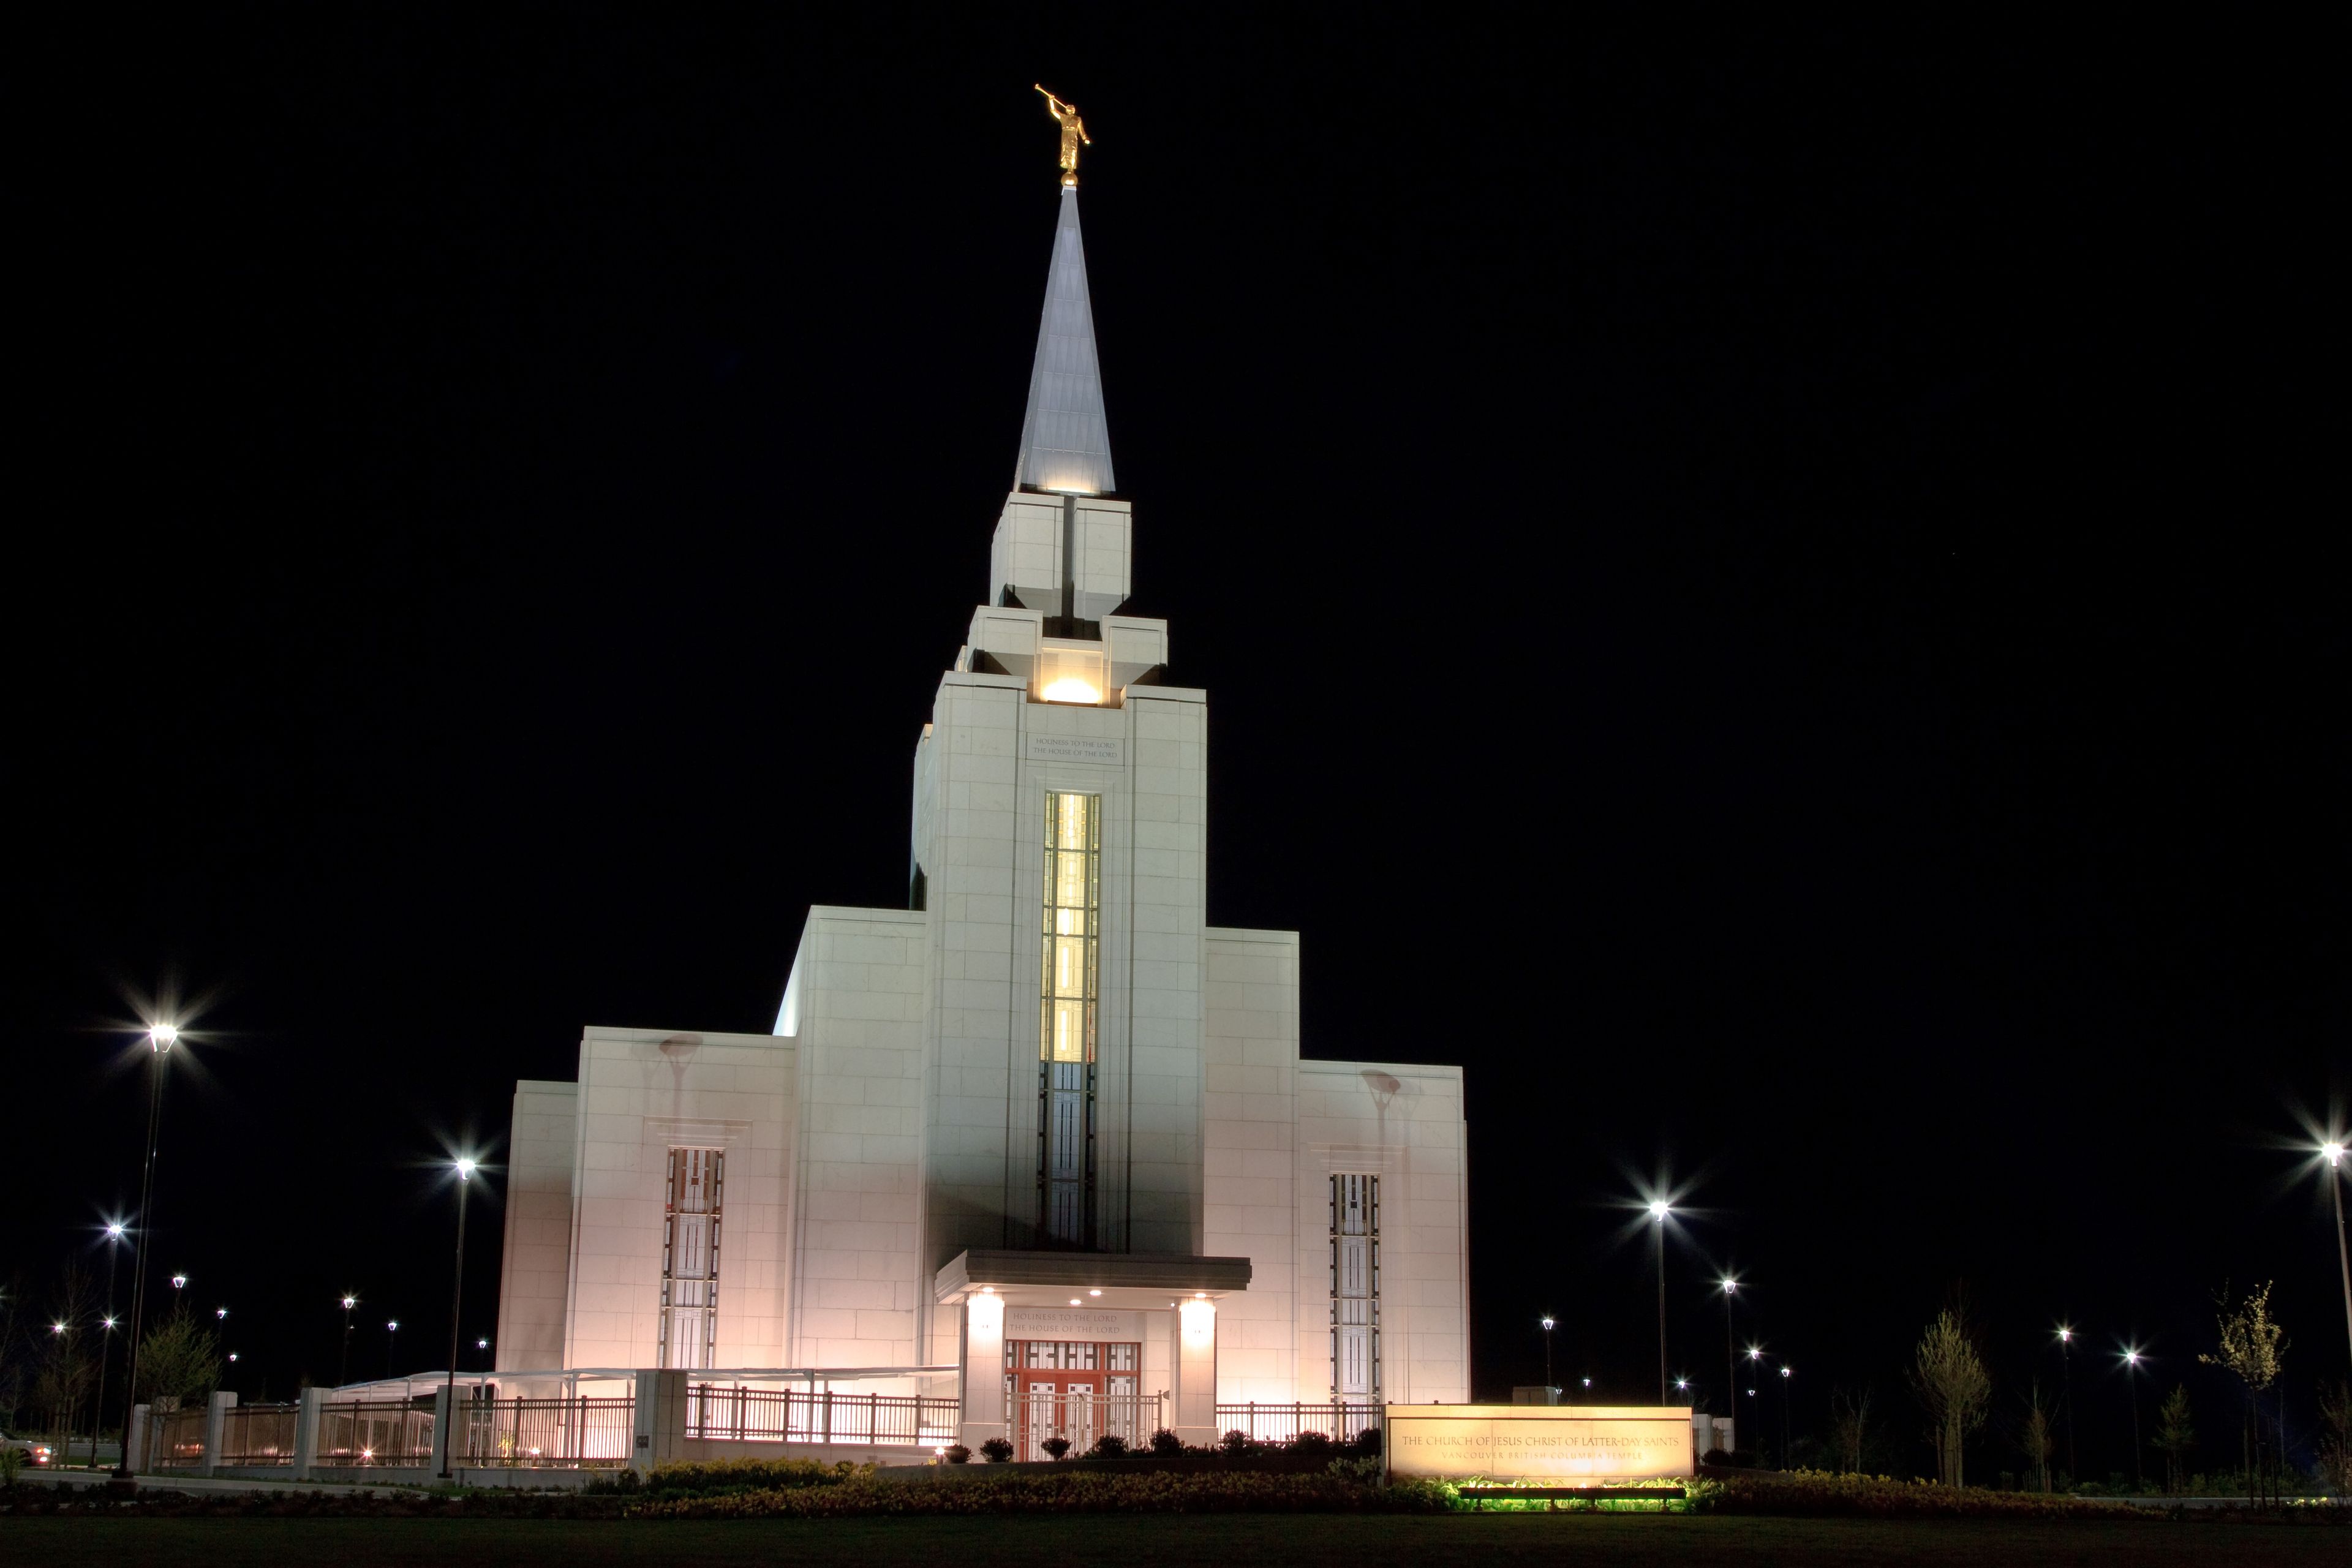 The Vancouver British Columbia Temple in the evening, with the entrance.